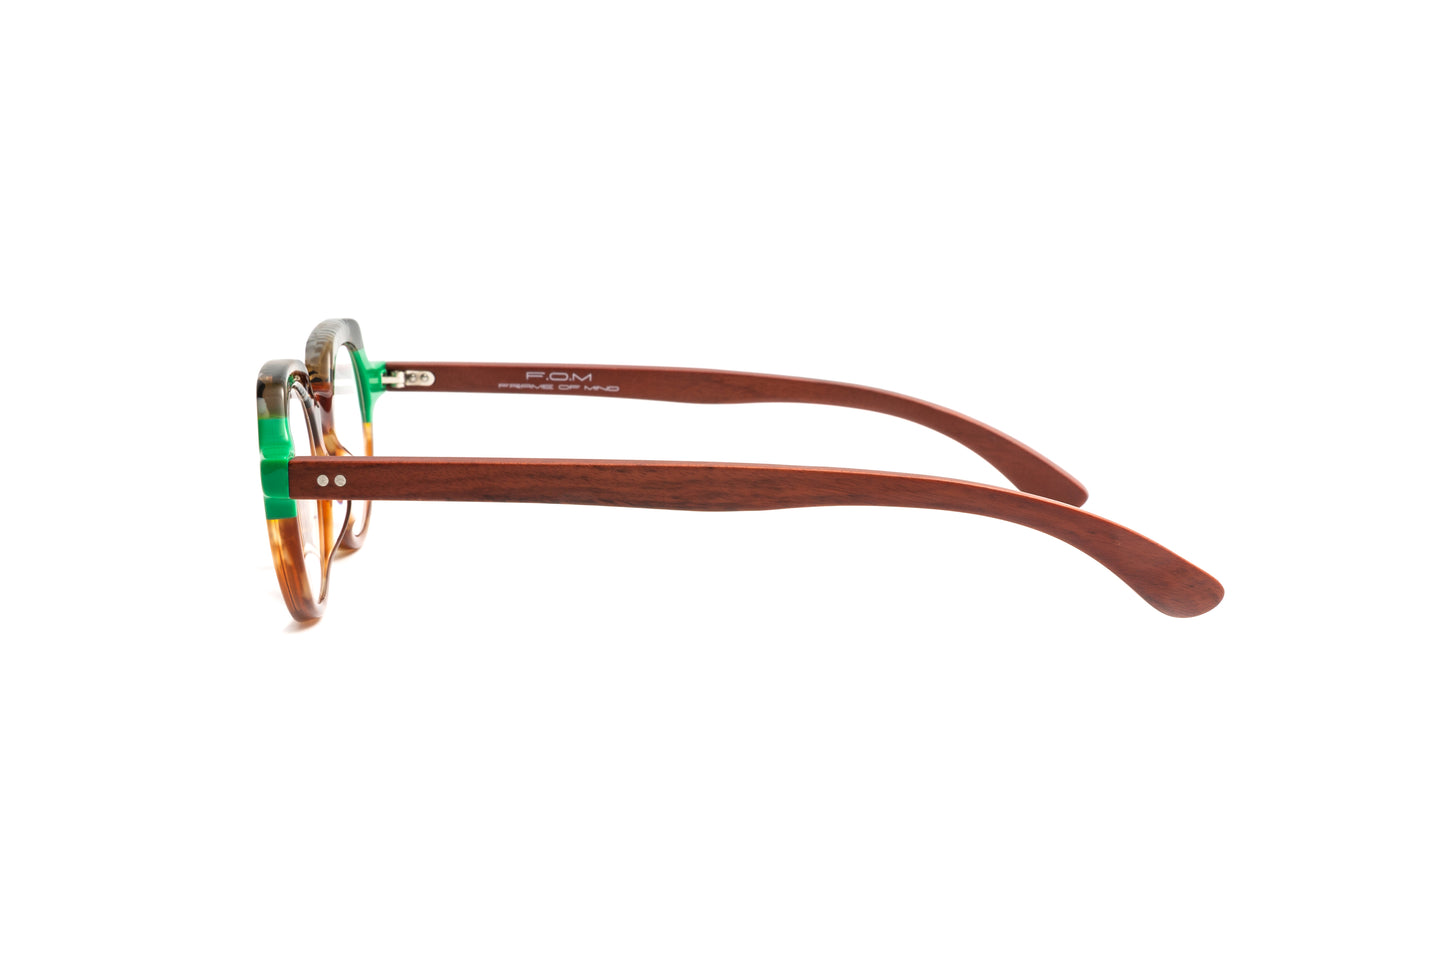 St Barths round unisex reading glasses with a multi color green, tortoise, brown acetate frame and cherry wood temples by Eyejets